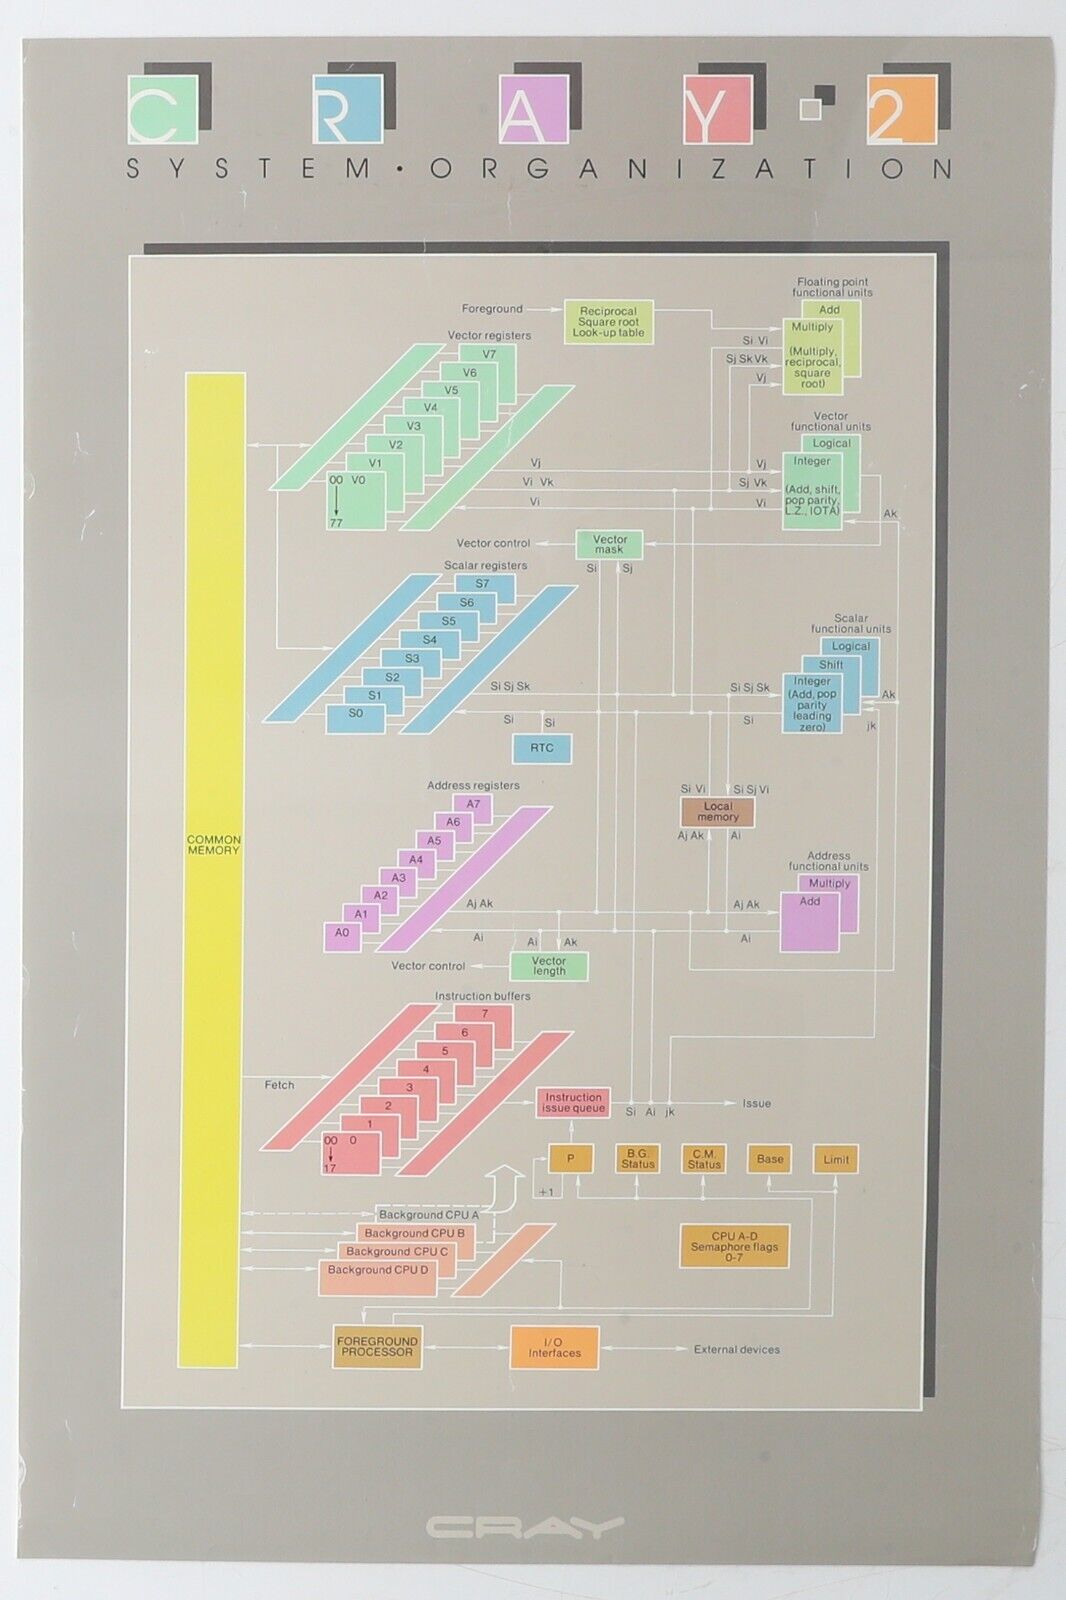 CRAY 2 SYSTEM ORGANIZATION POSTER - Authentic Cray Research